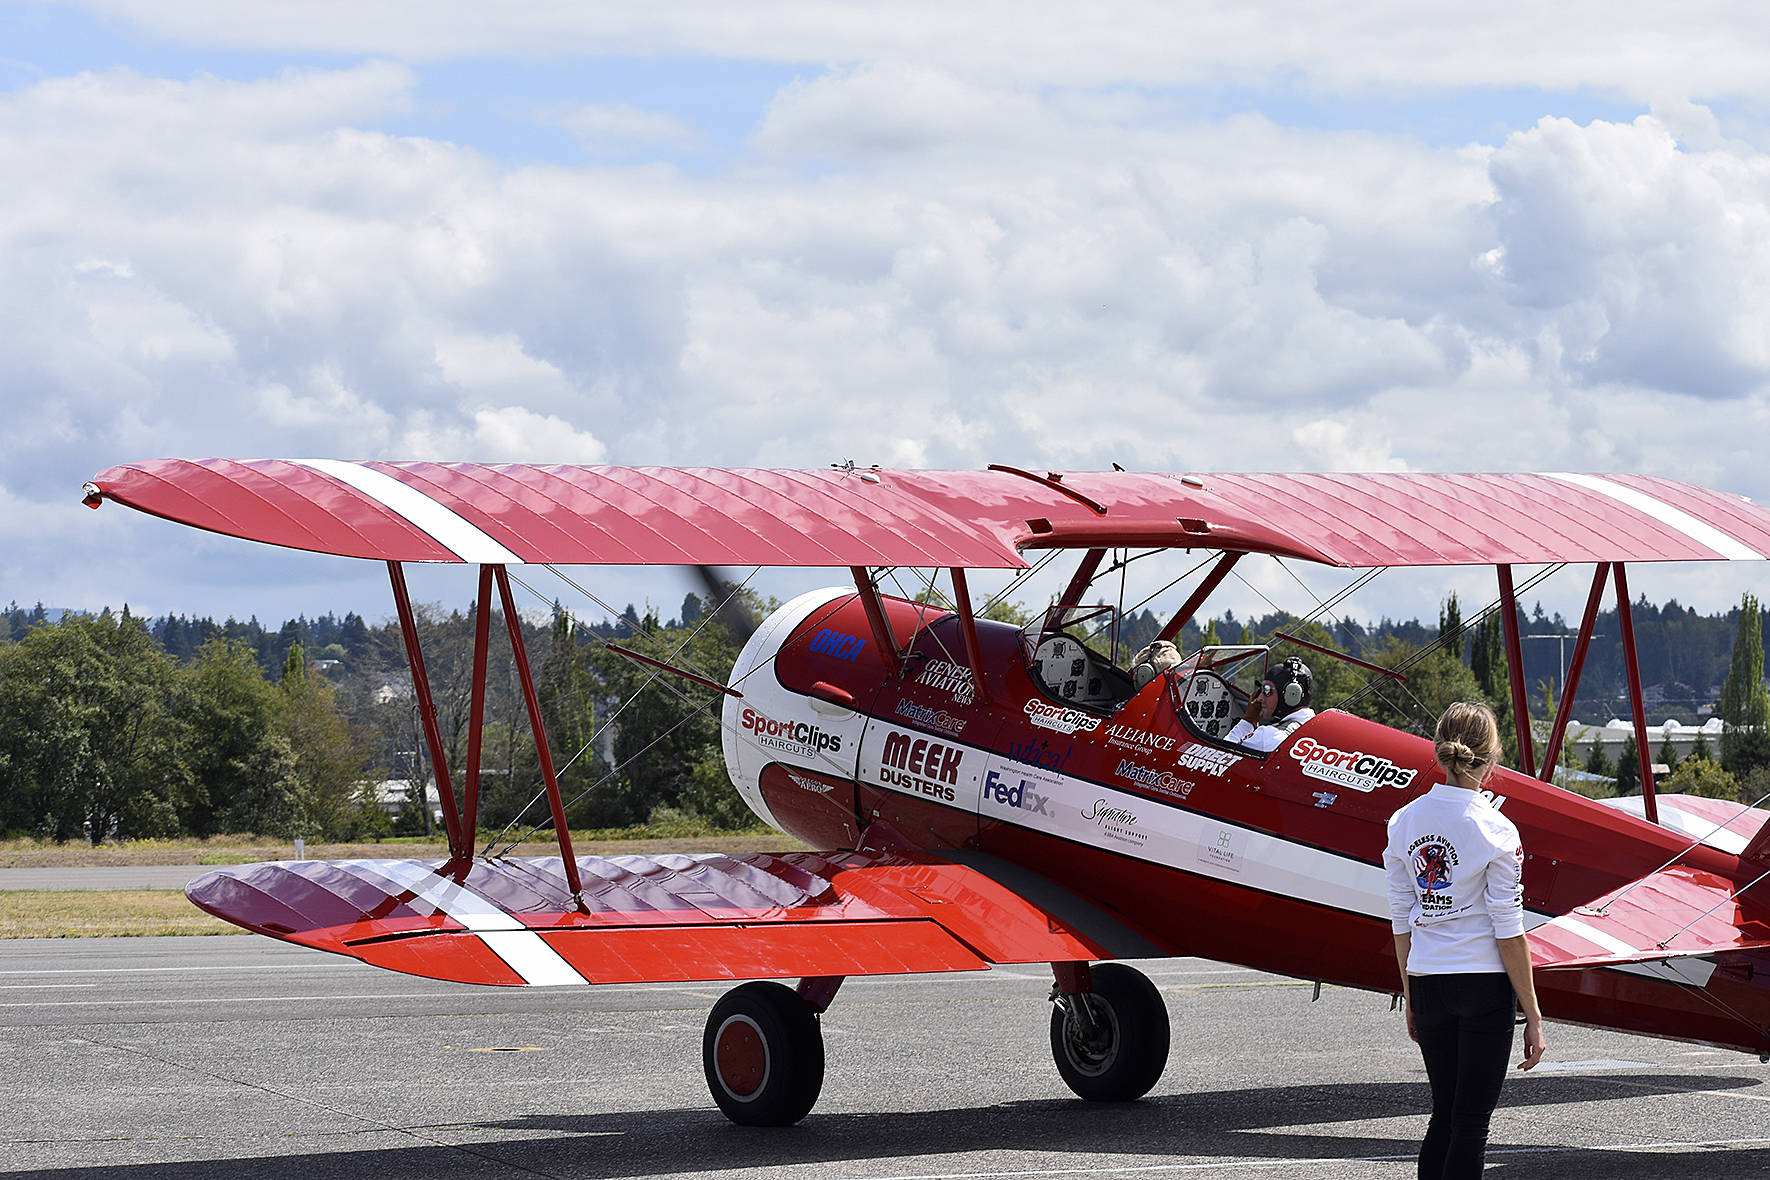 Photo by Haley Ausbun. Seniors in nearby care facilities took flight in a 1942 Boeing Stearman biplane at Renton Municipal Airport, offered by Ageless Aviation Dreams Foundation.